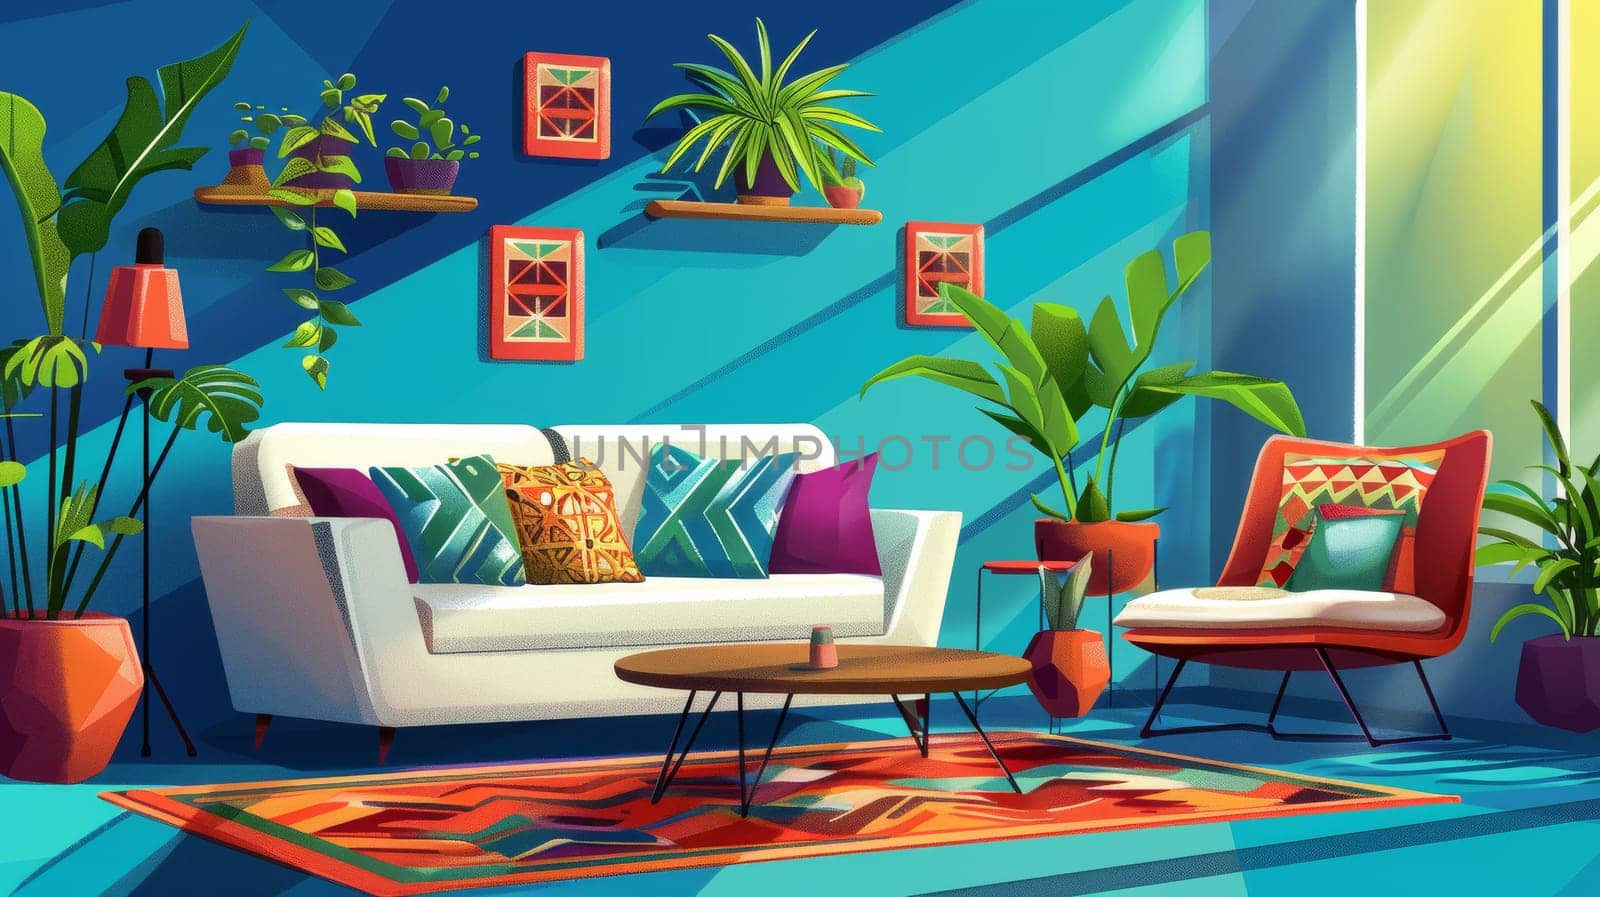 In this bohemian living room interior with blue wall, sofa, coffee table and plants on shelves, you can see a carpet and armchair decorated with geometric shapes.